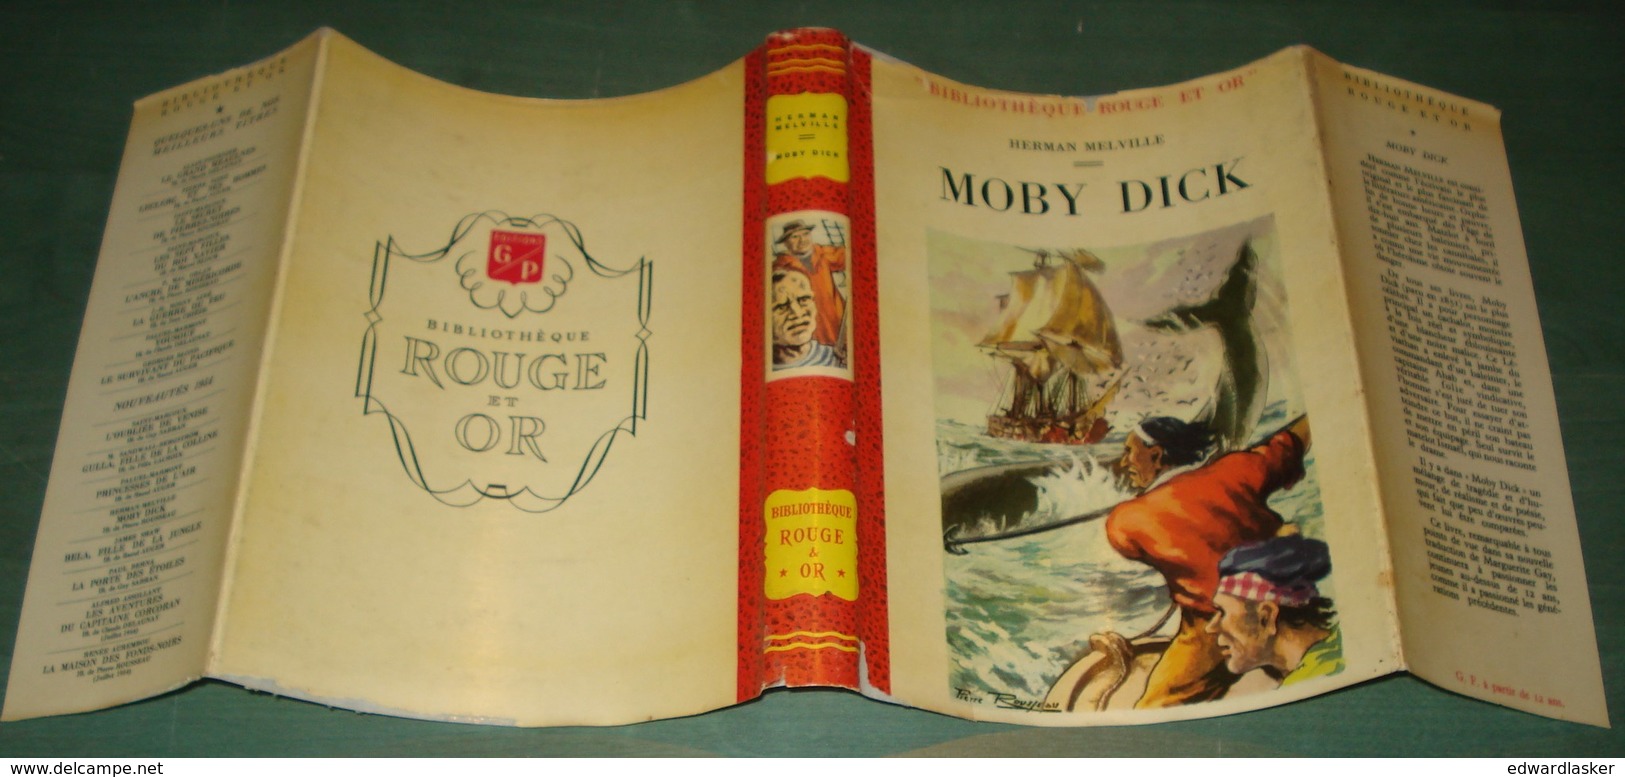 Bibl. ROUGE ET OR N°72 : MOBY DICK //Herman Melville - 1954 - Pierre Rousseau - Bibliotheque Rouge Et Or